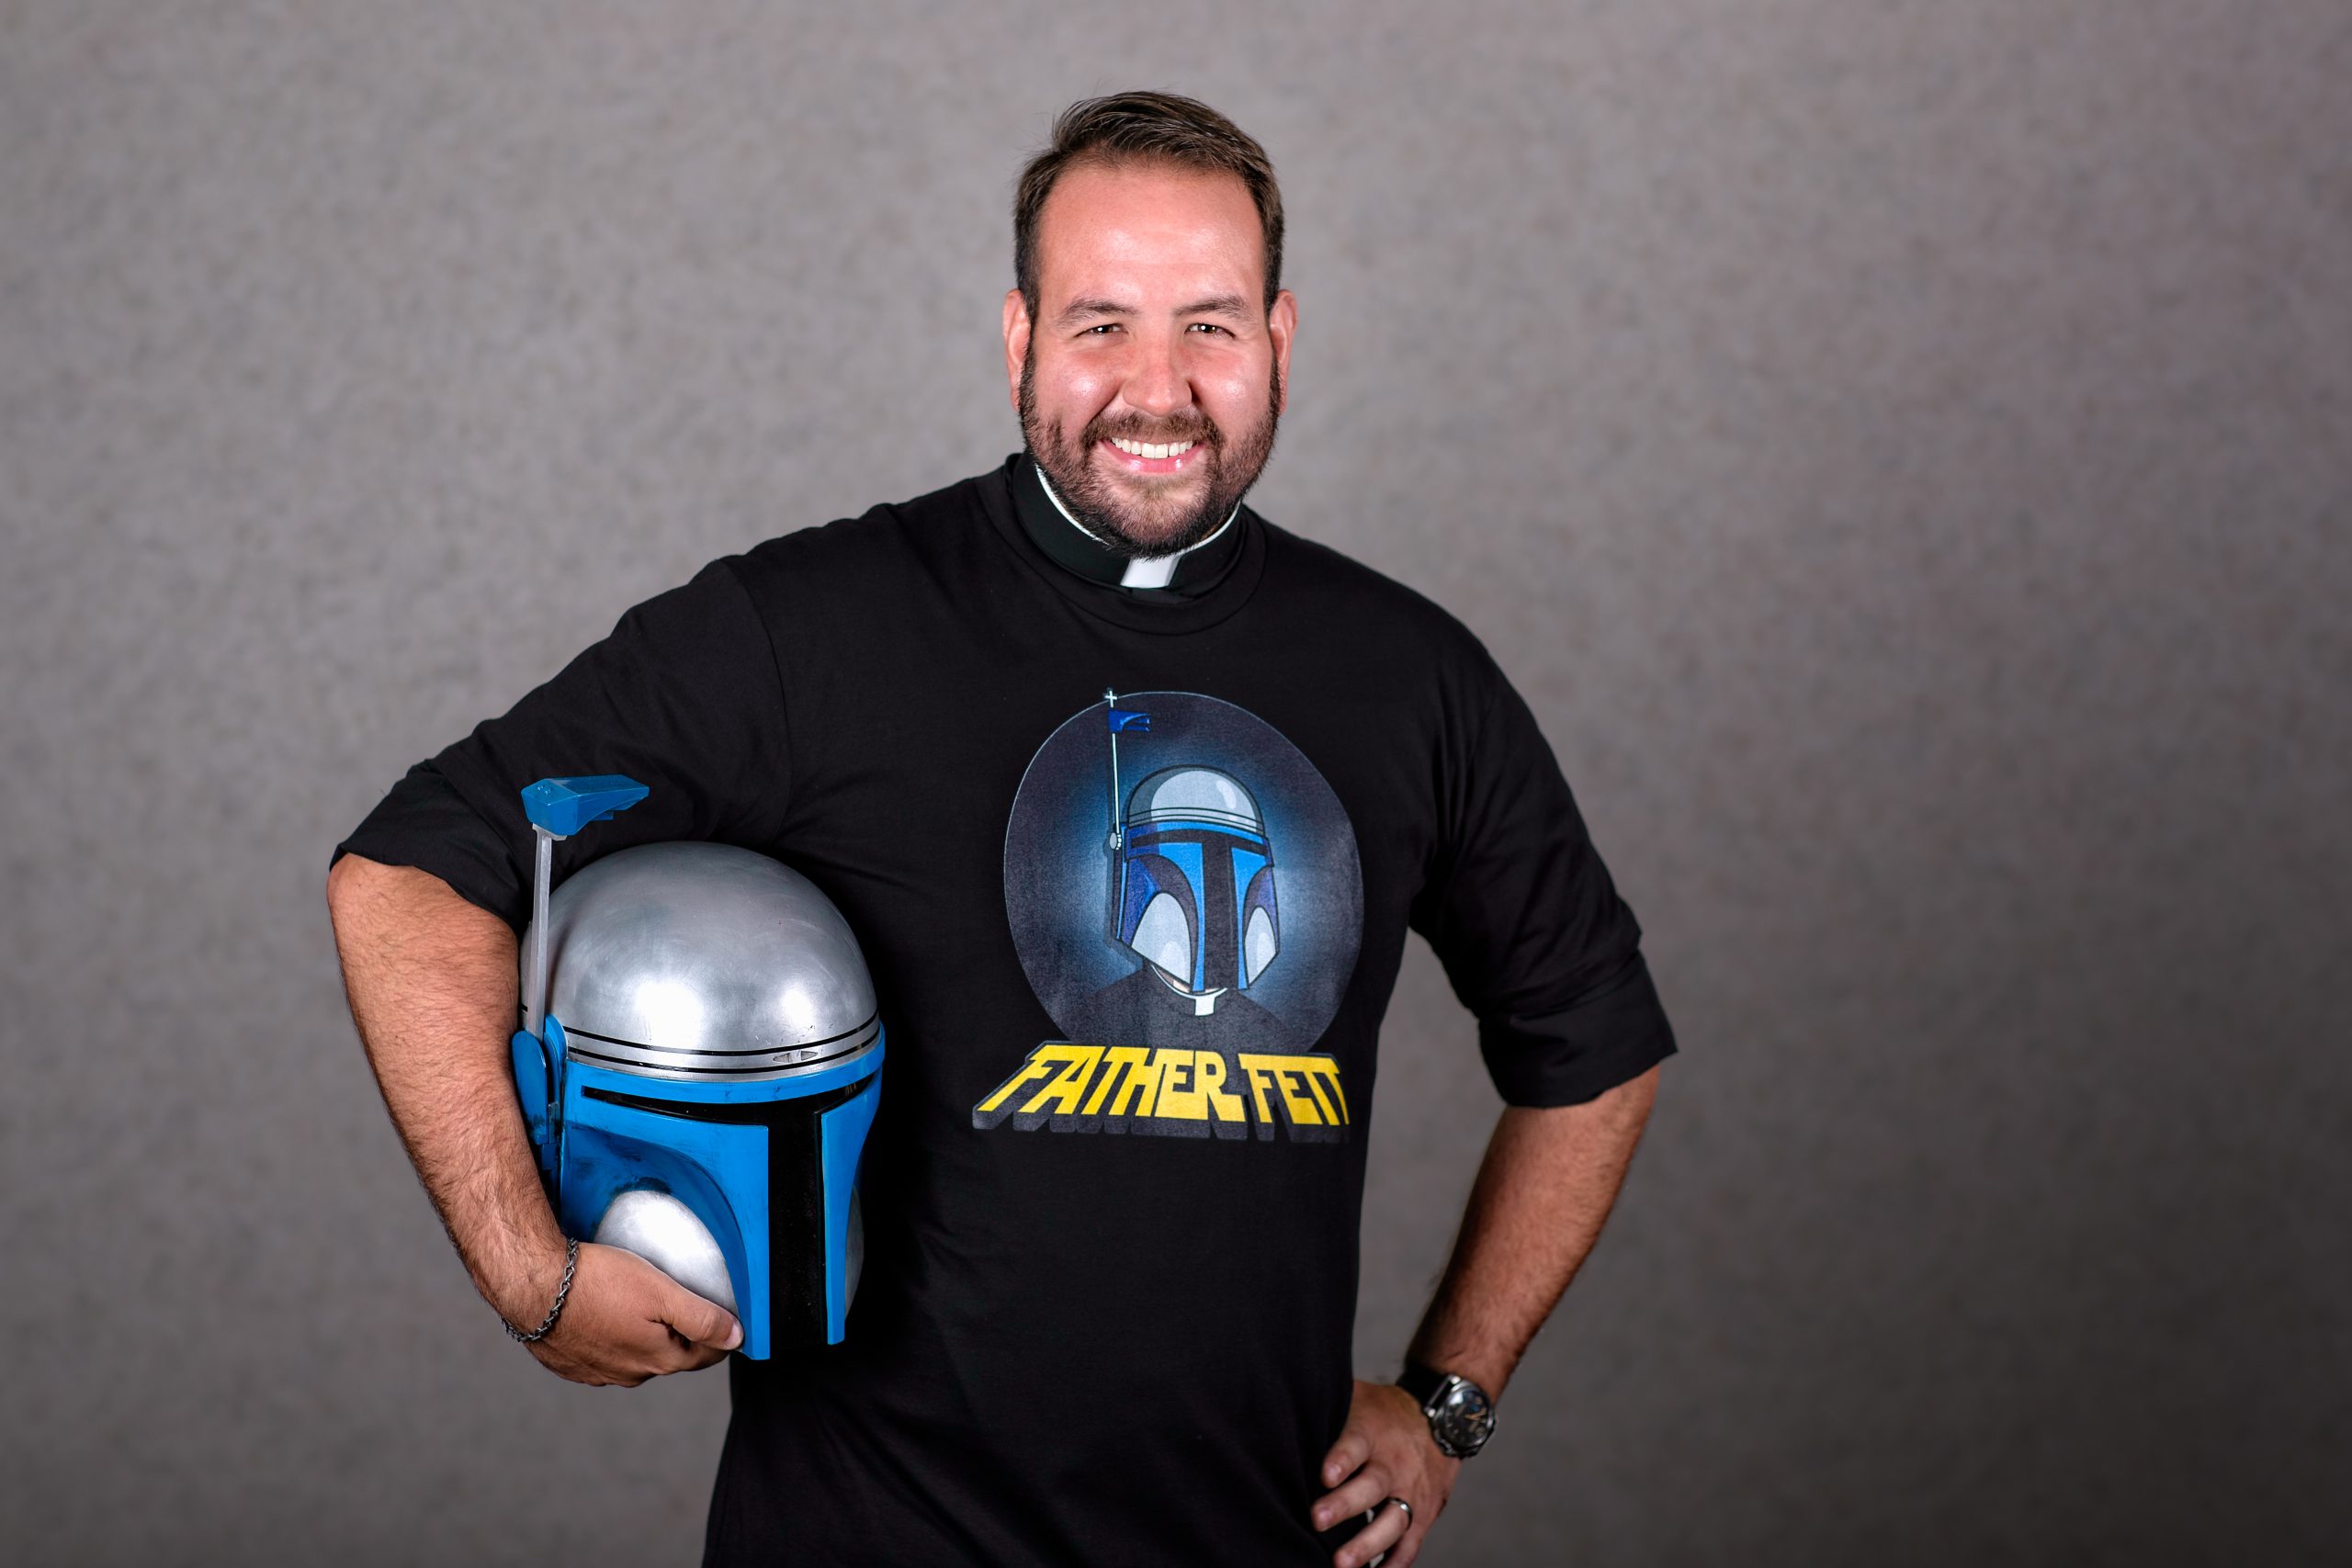 Fr. Andrew Kinstetter, also known as Father Fett